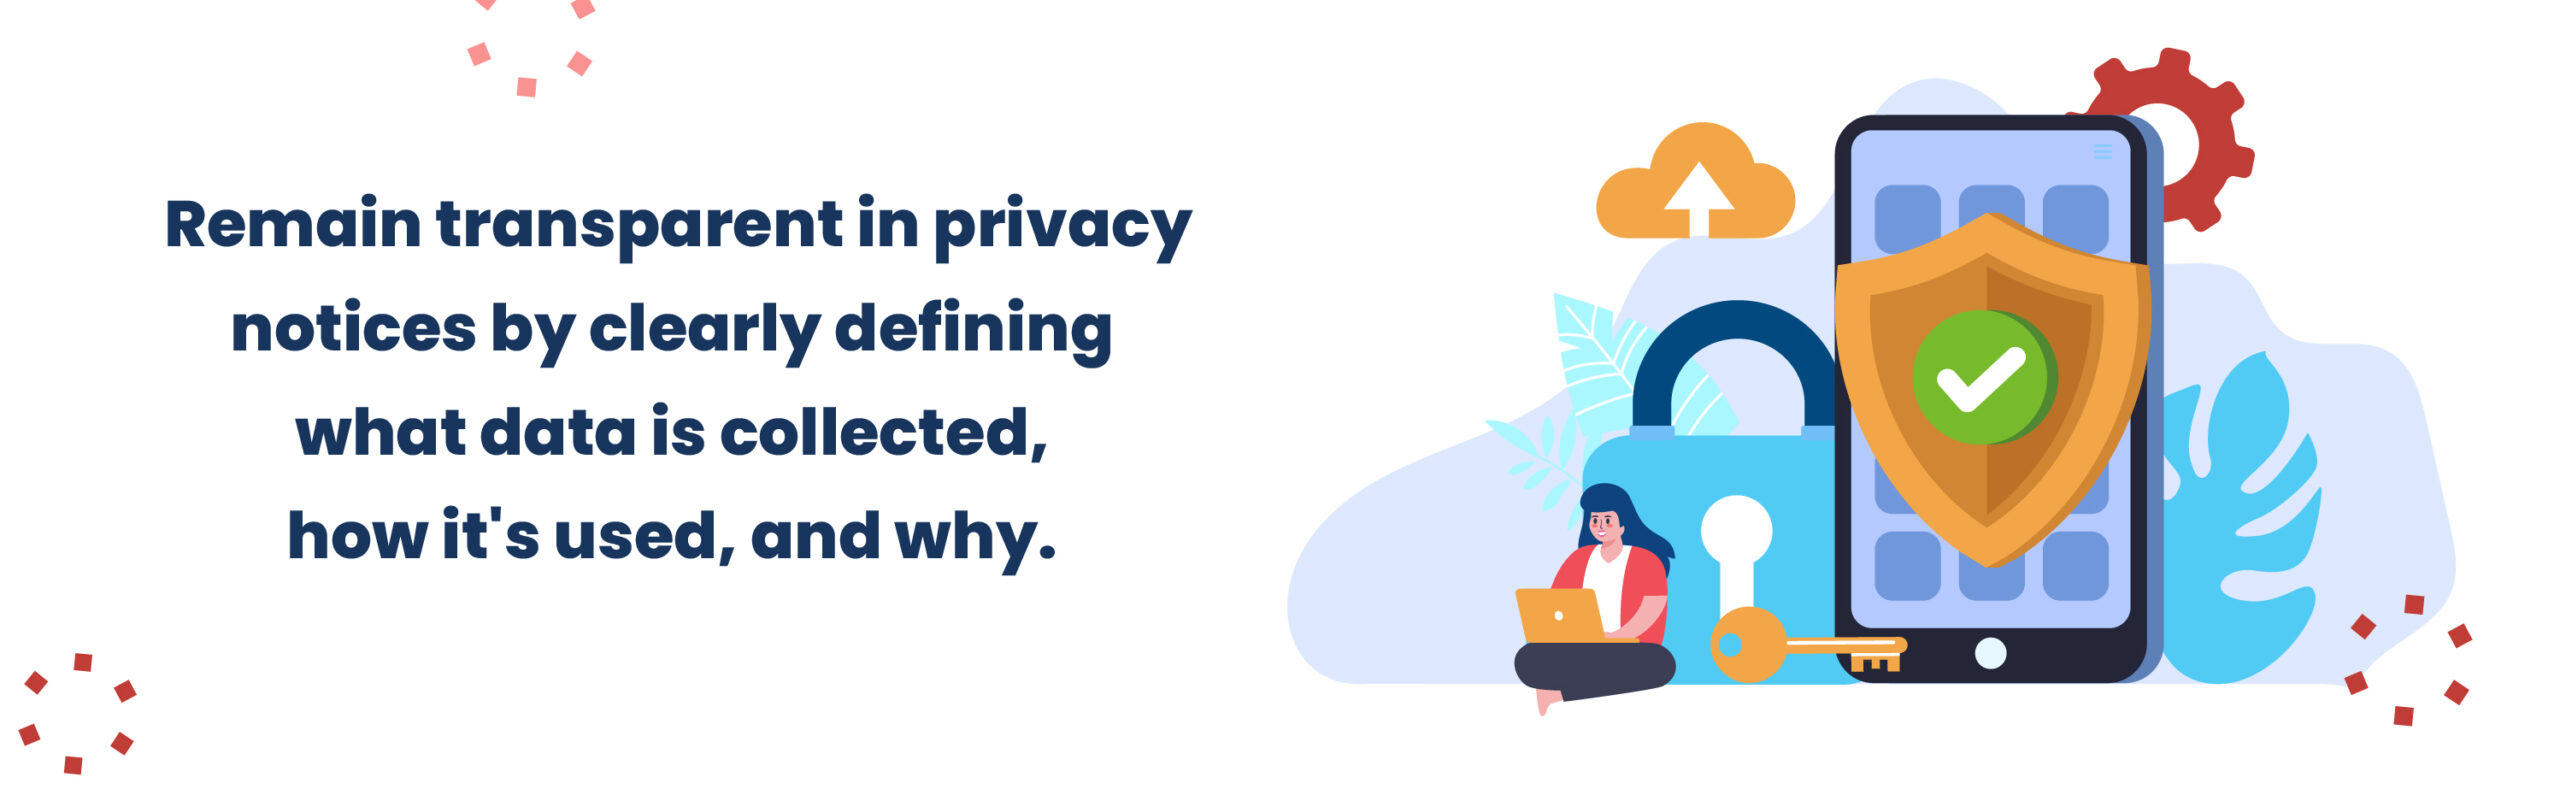 Remain transparent in privacy notices by clearly defining what data is collected, how it's used, and why.